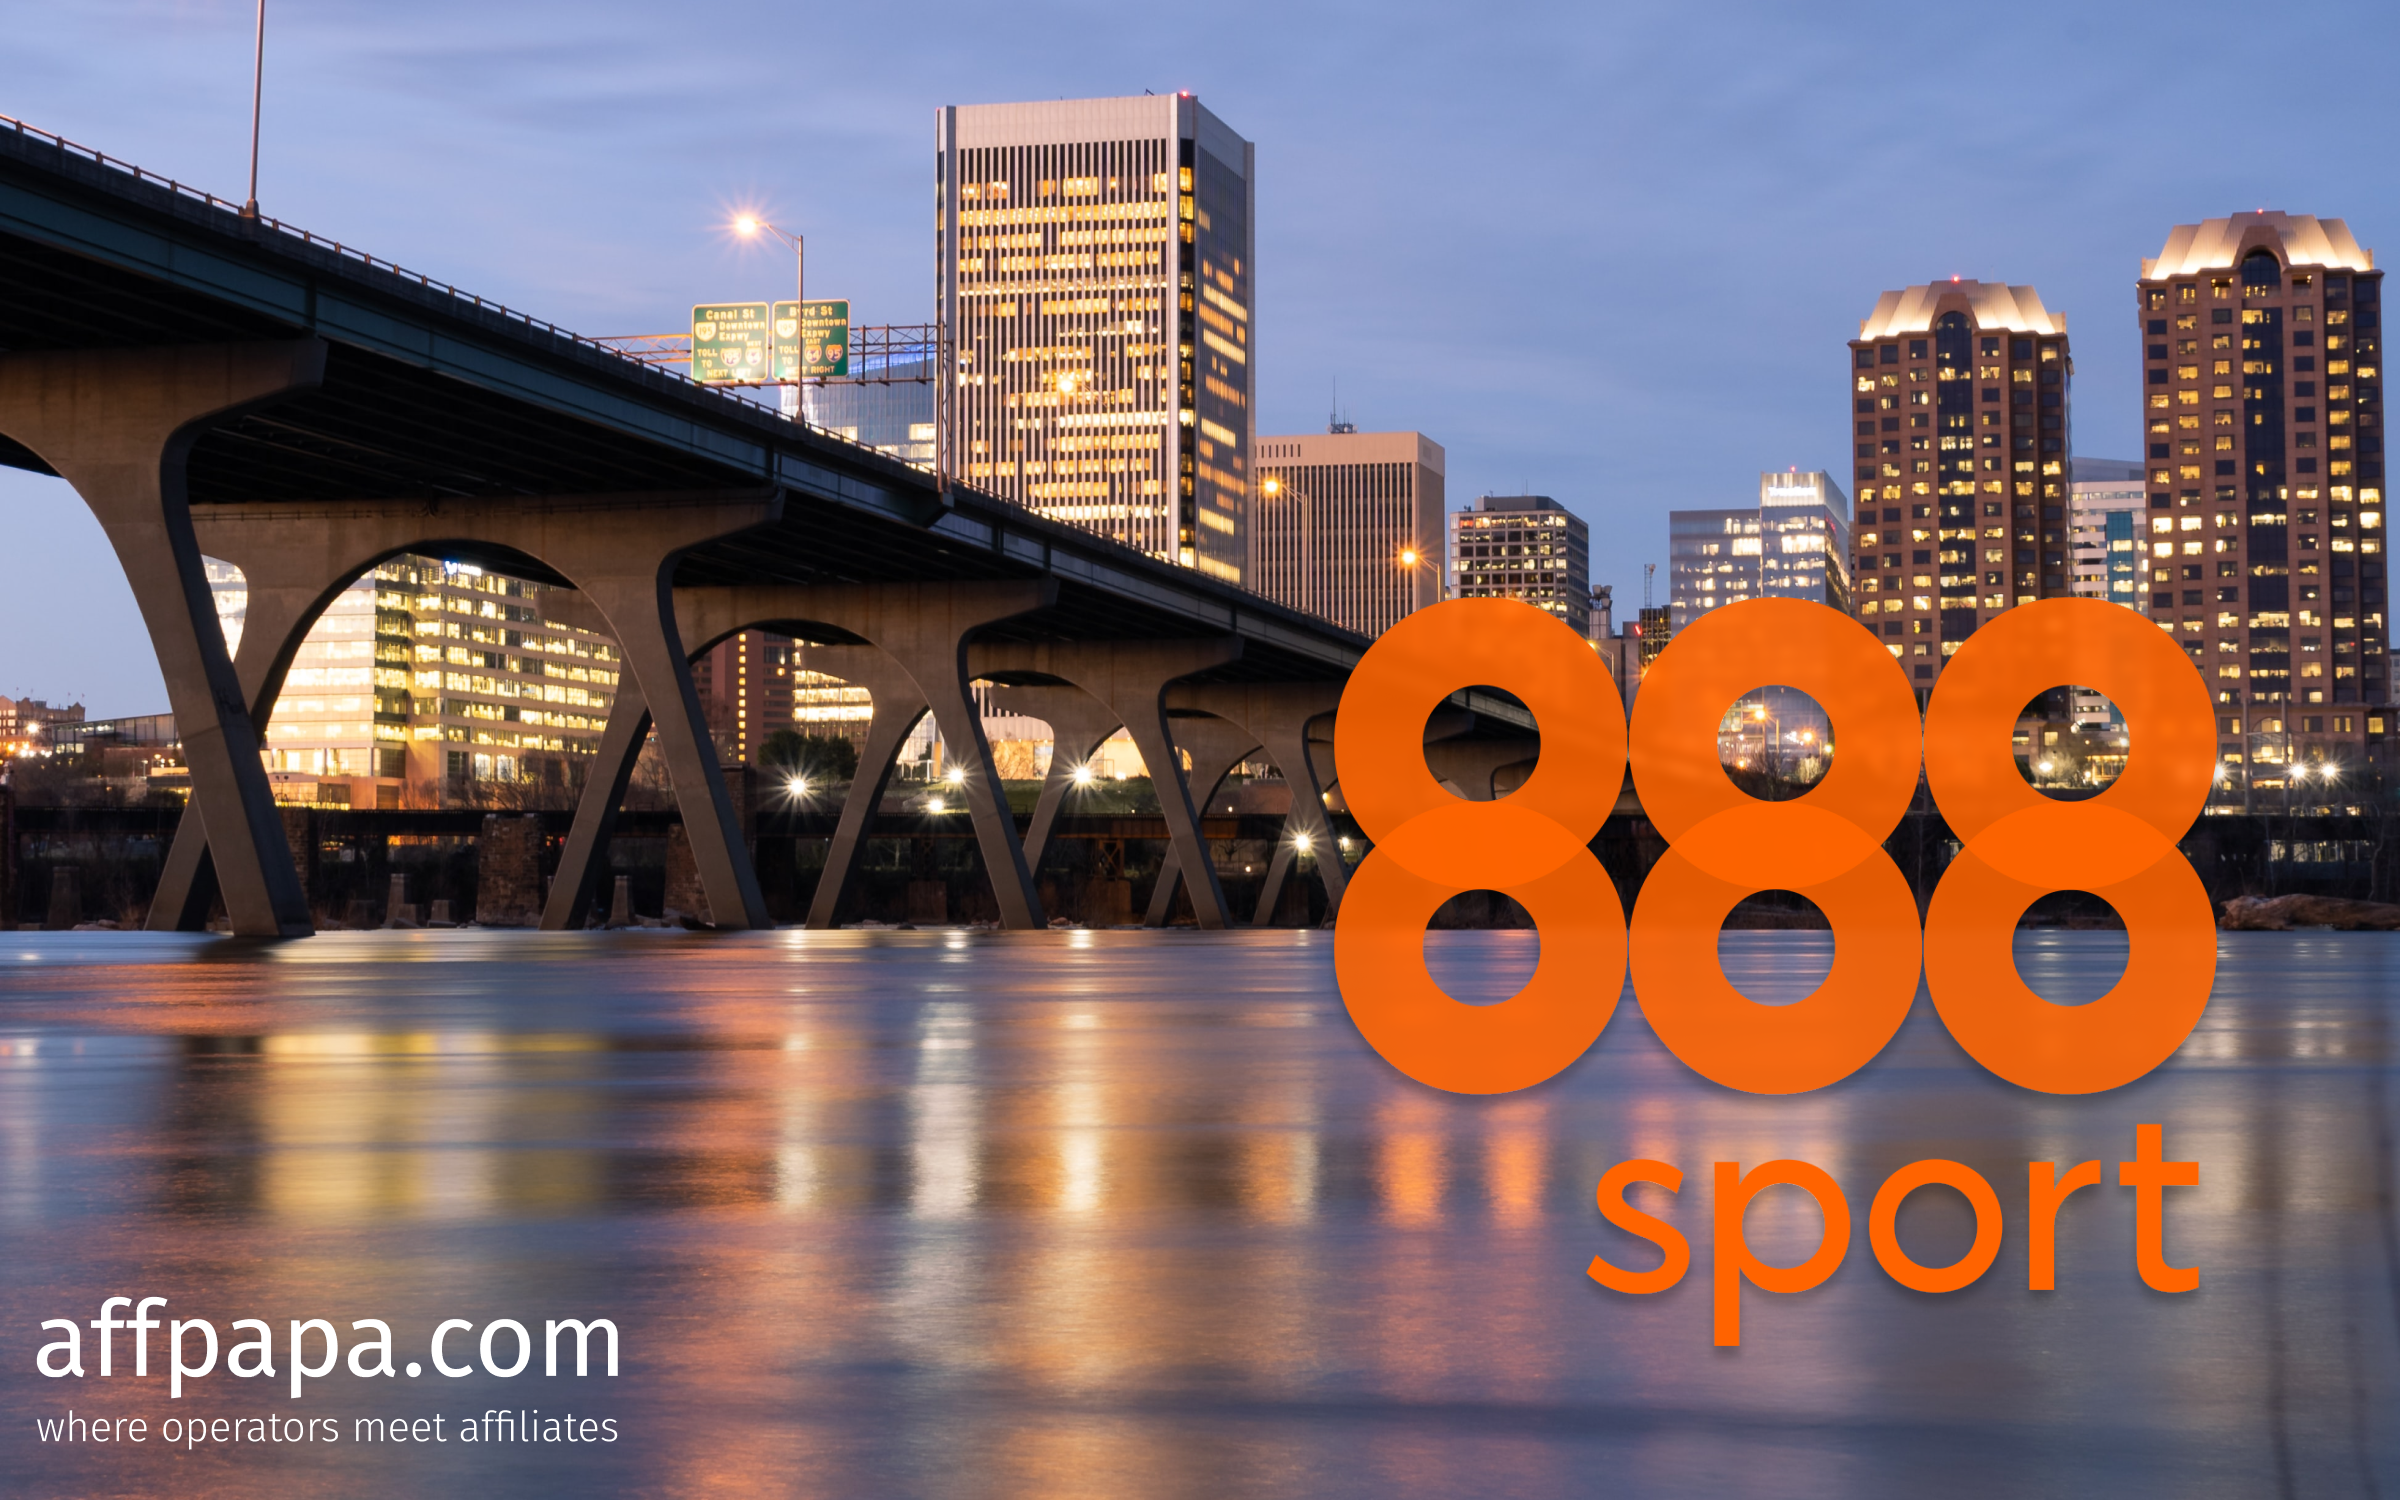 888 releases Sports Illustrated online sportsbook in Virginia